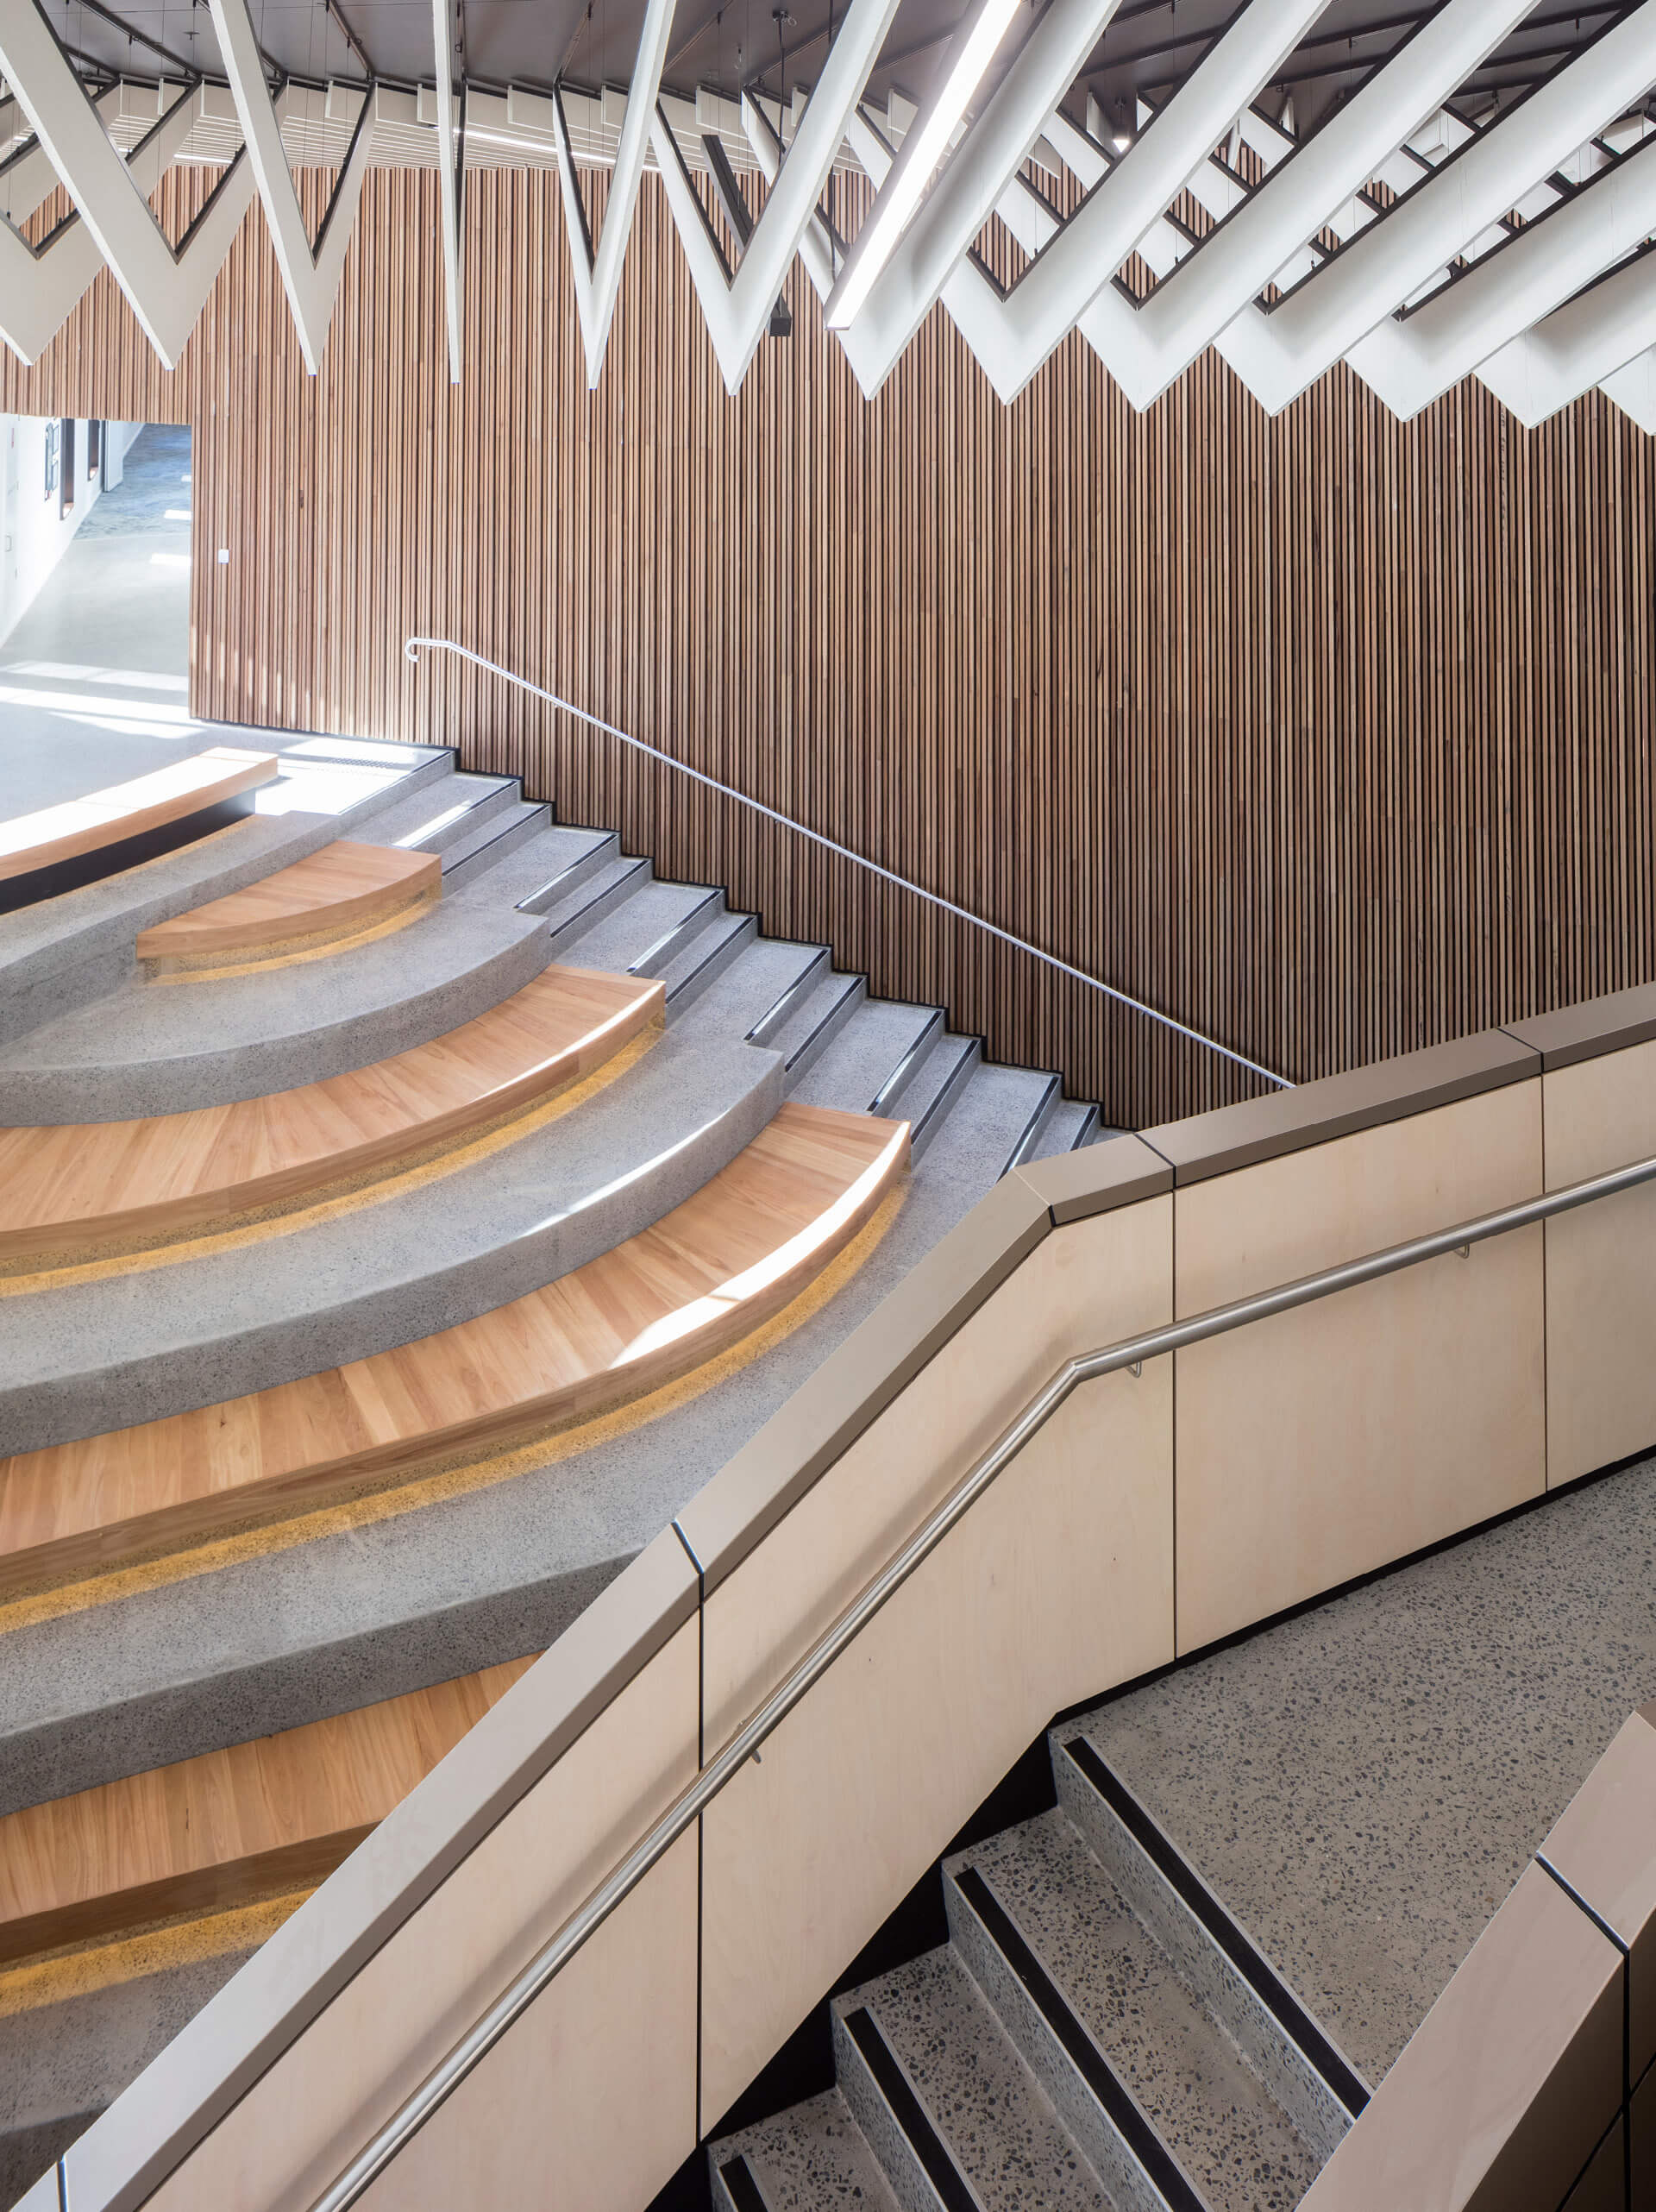 24 striking architectural shot ceiling stair and seating feature overlapping taronga zoo institute sydney taylor construction education